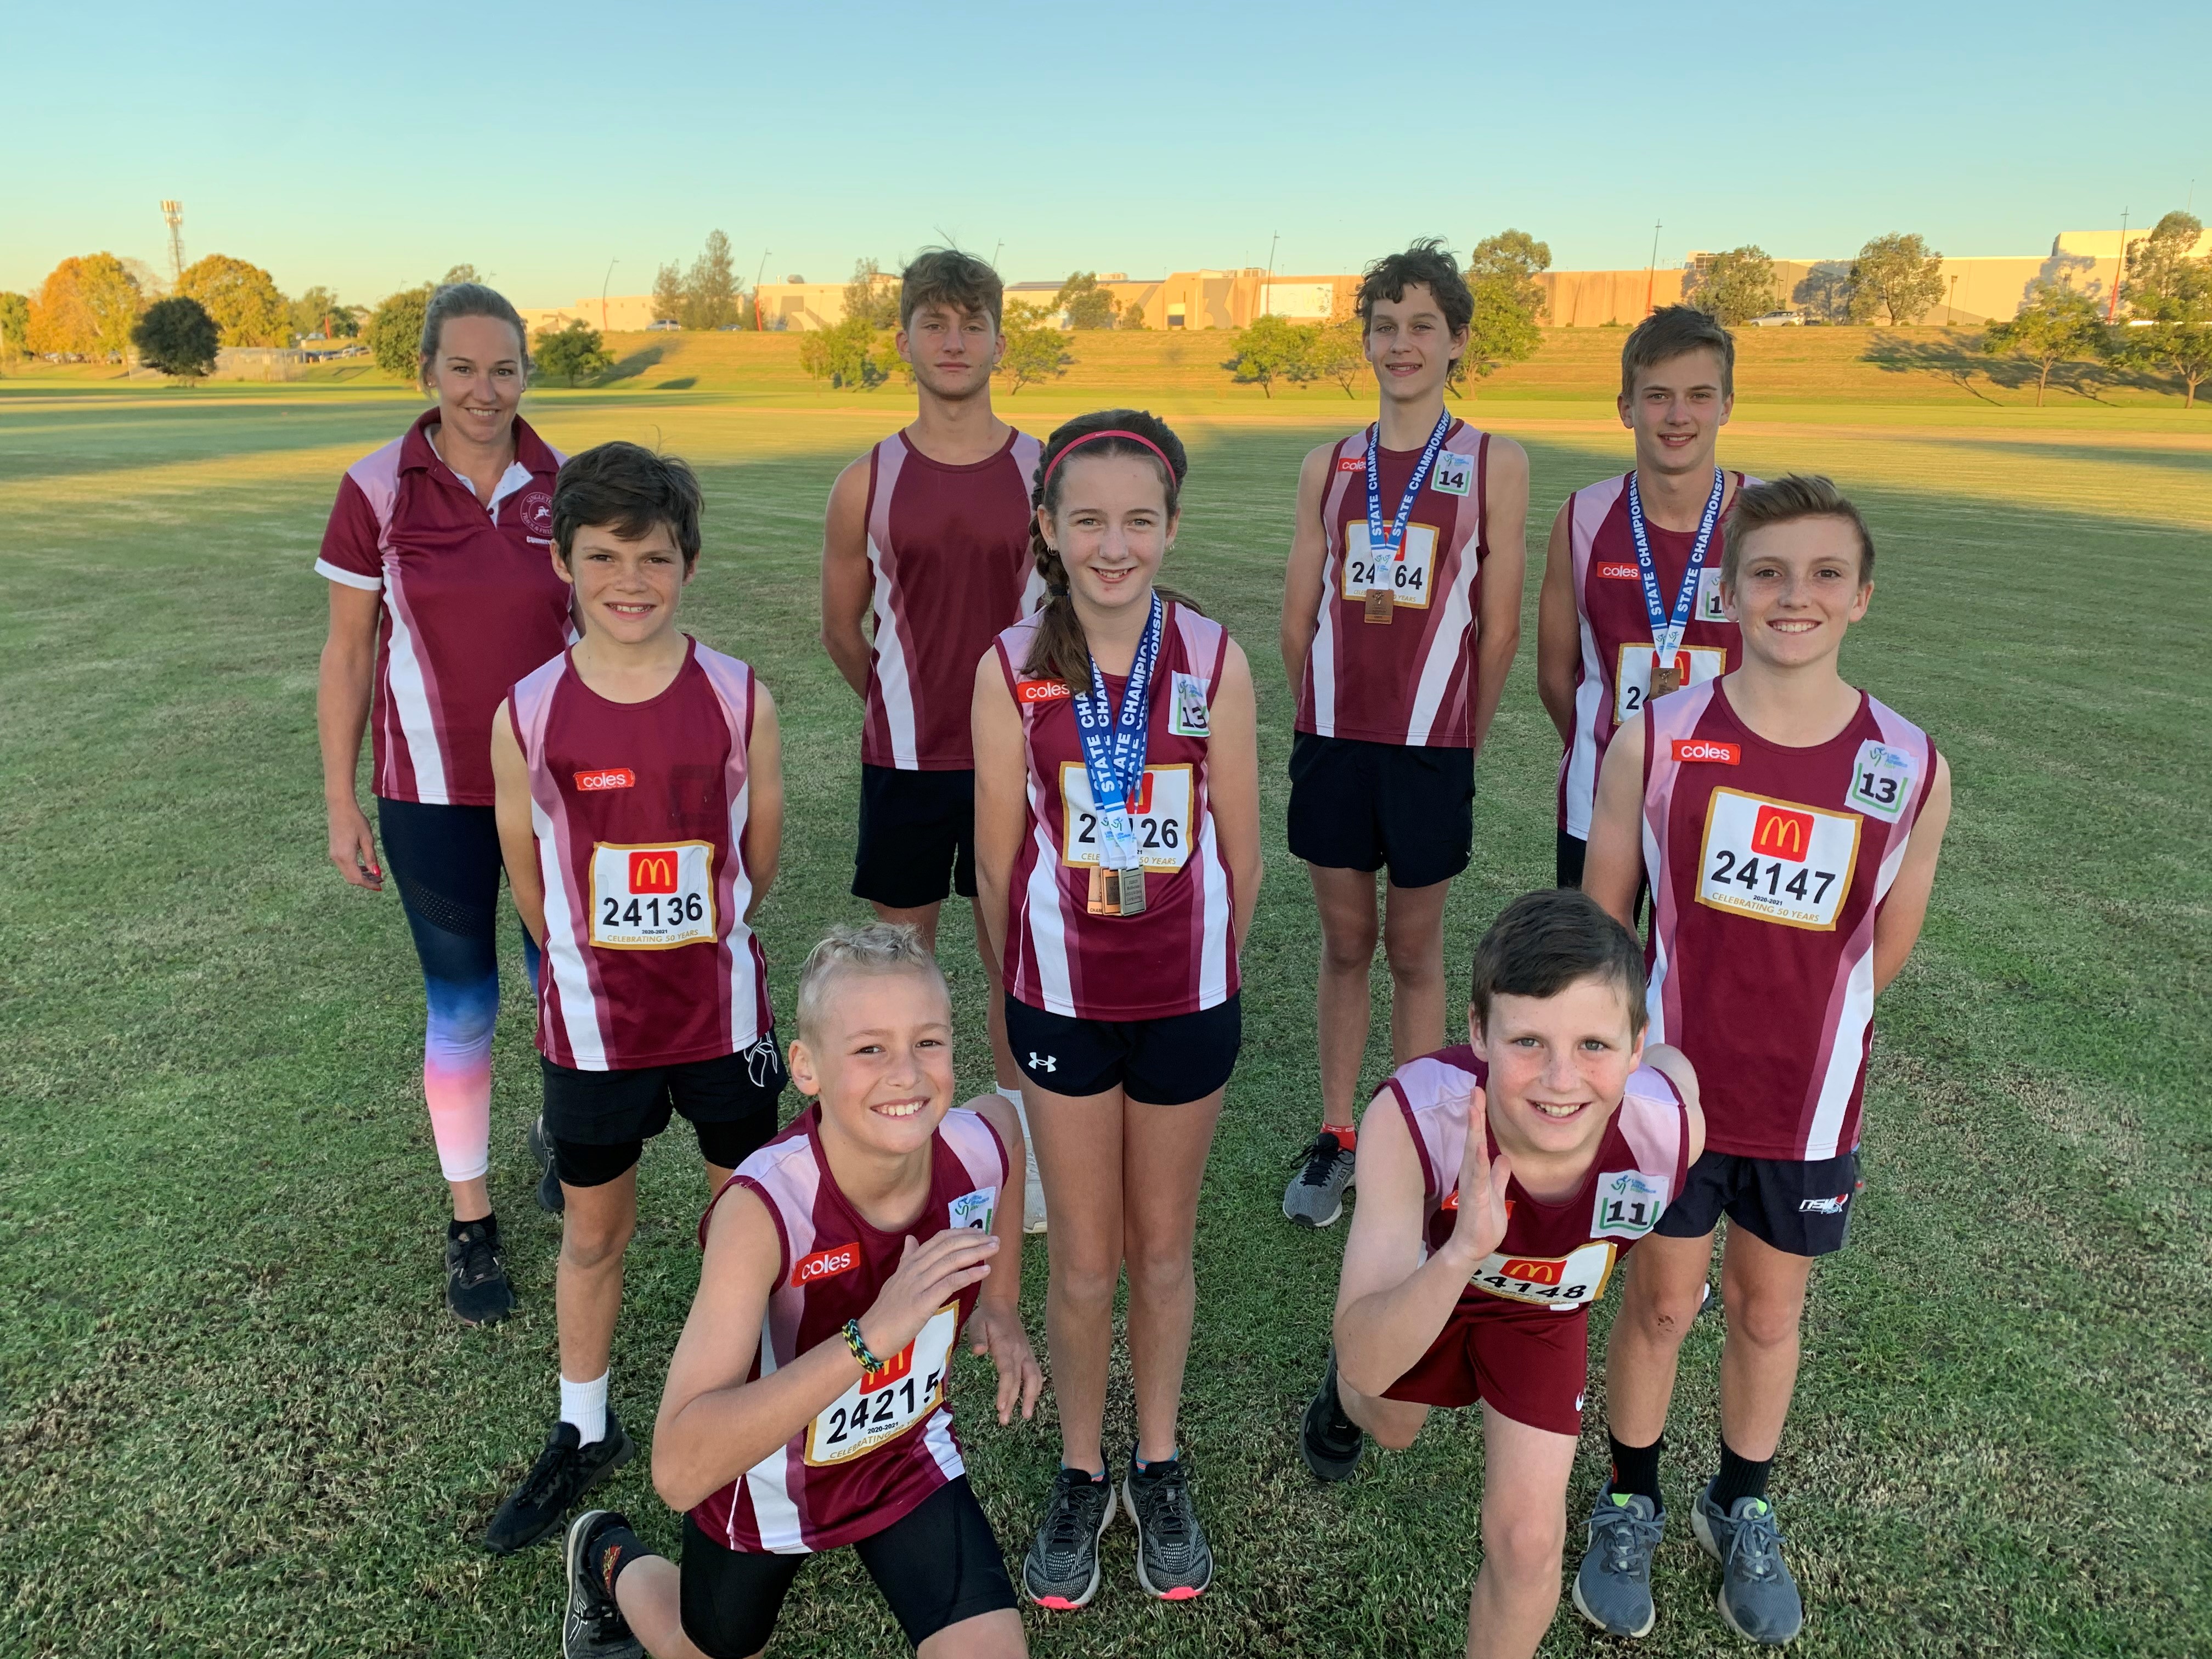 Top honour for Singleton Track and Field Club